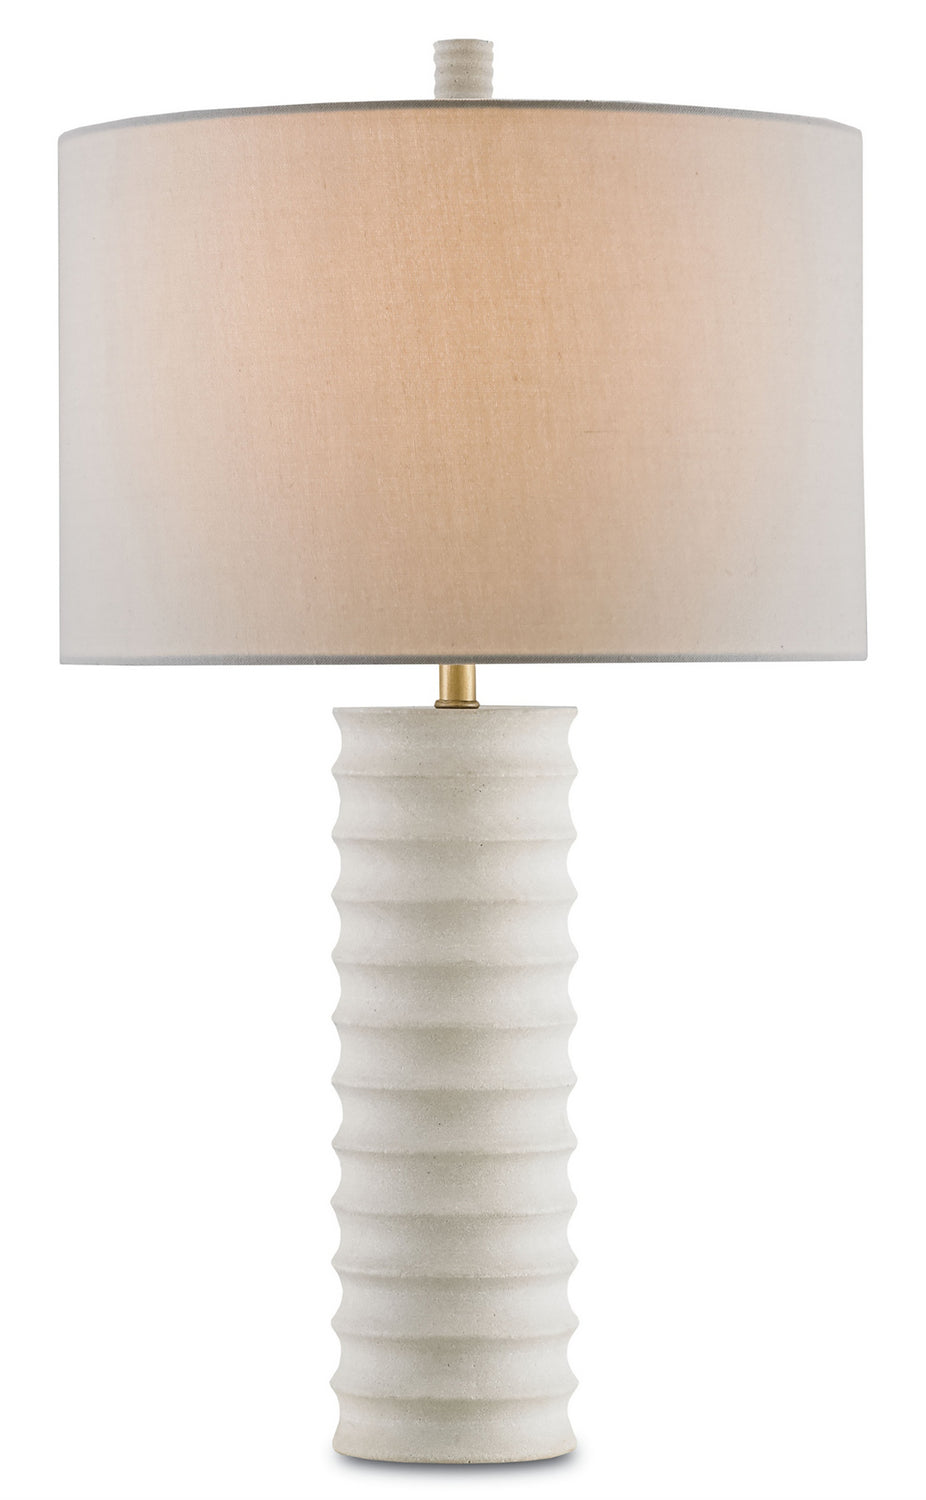 One Light Table Lamp from the Snowdrop collection in Natural finish